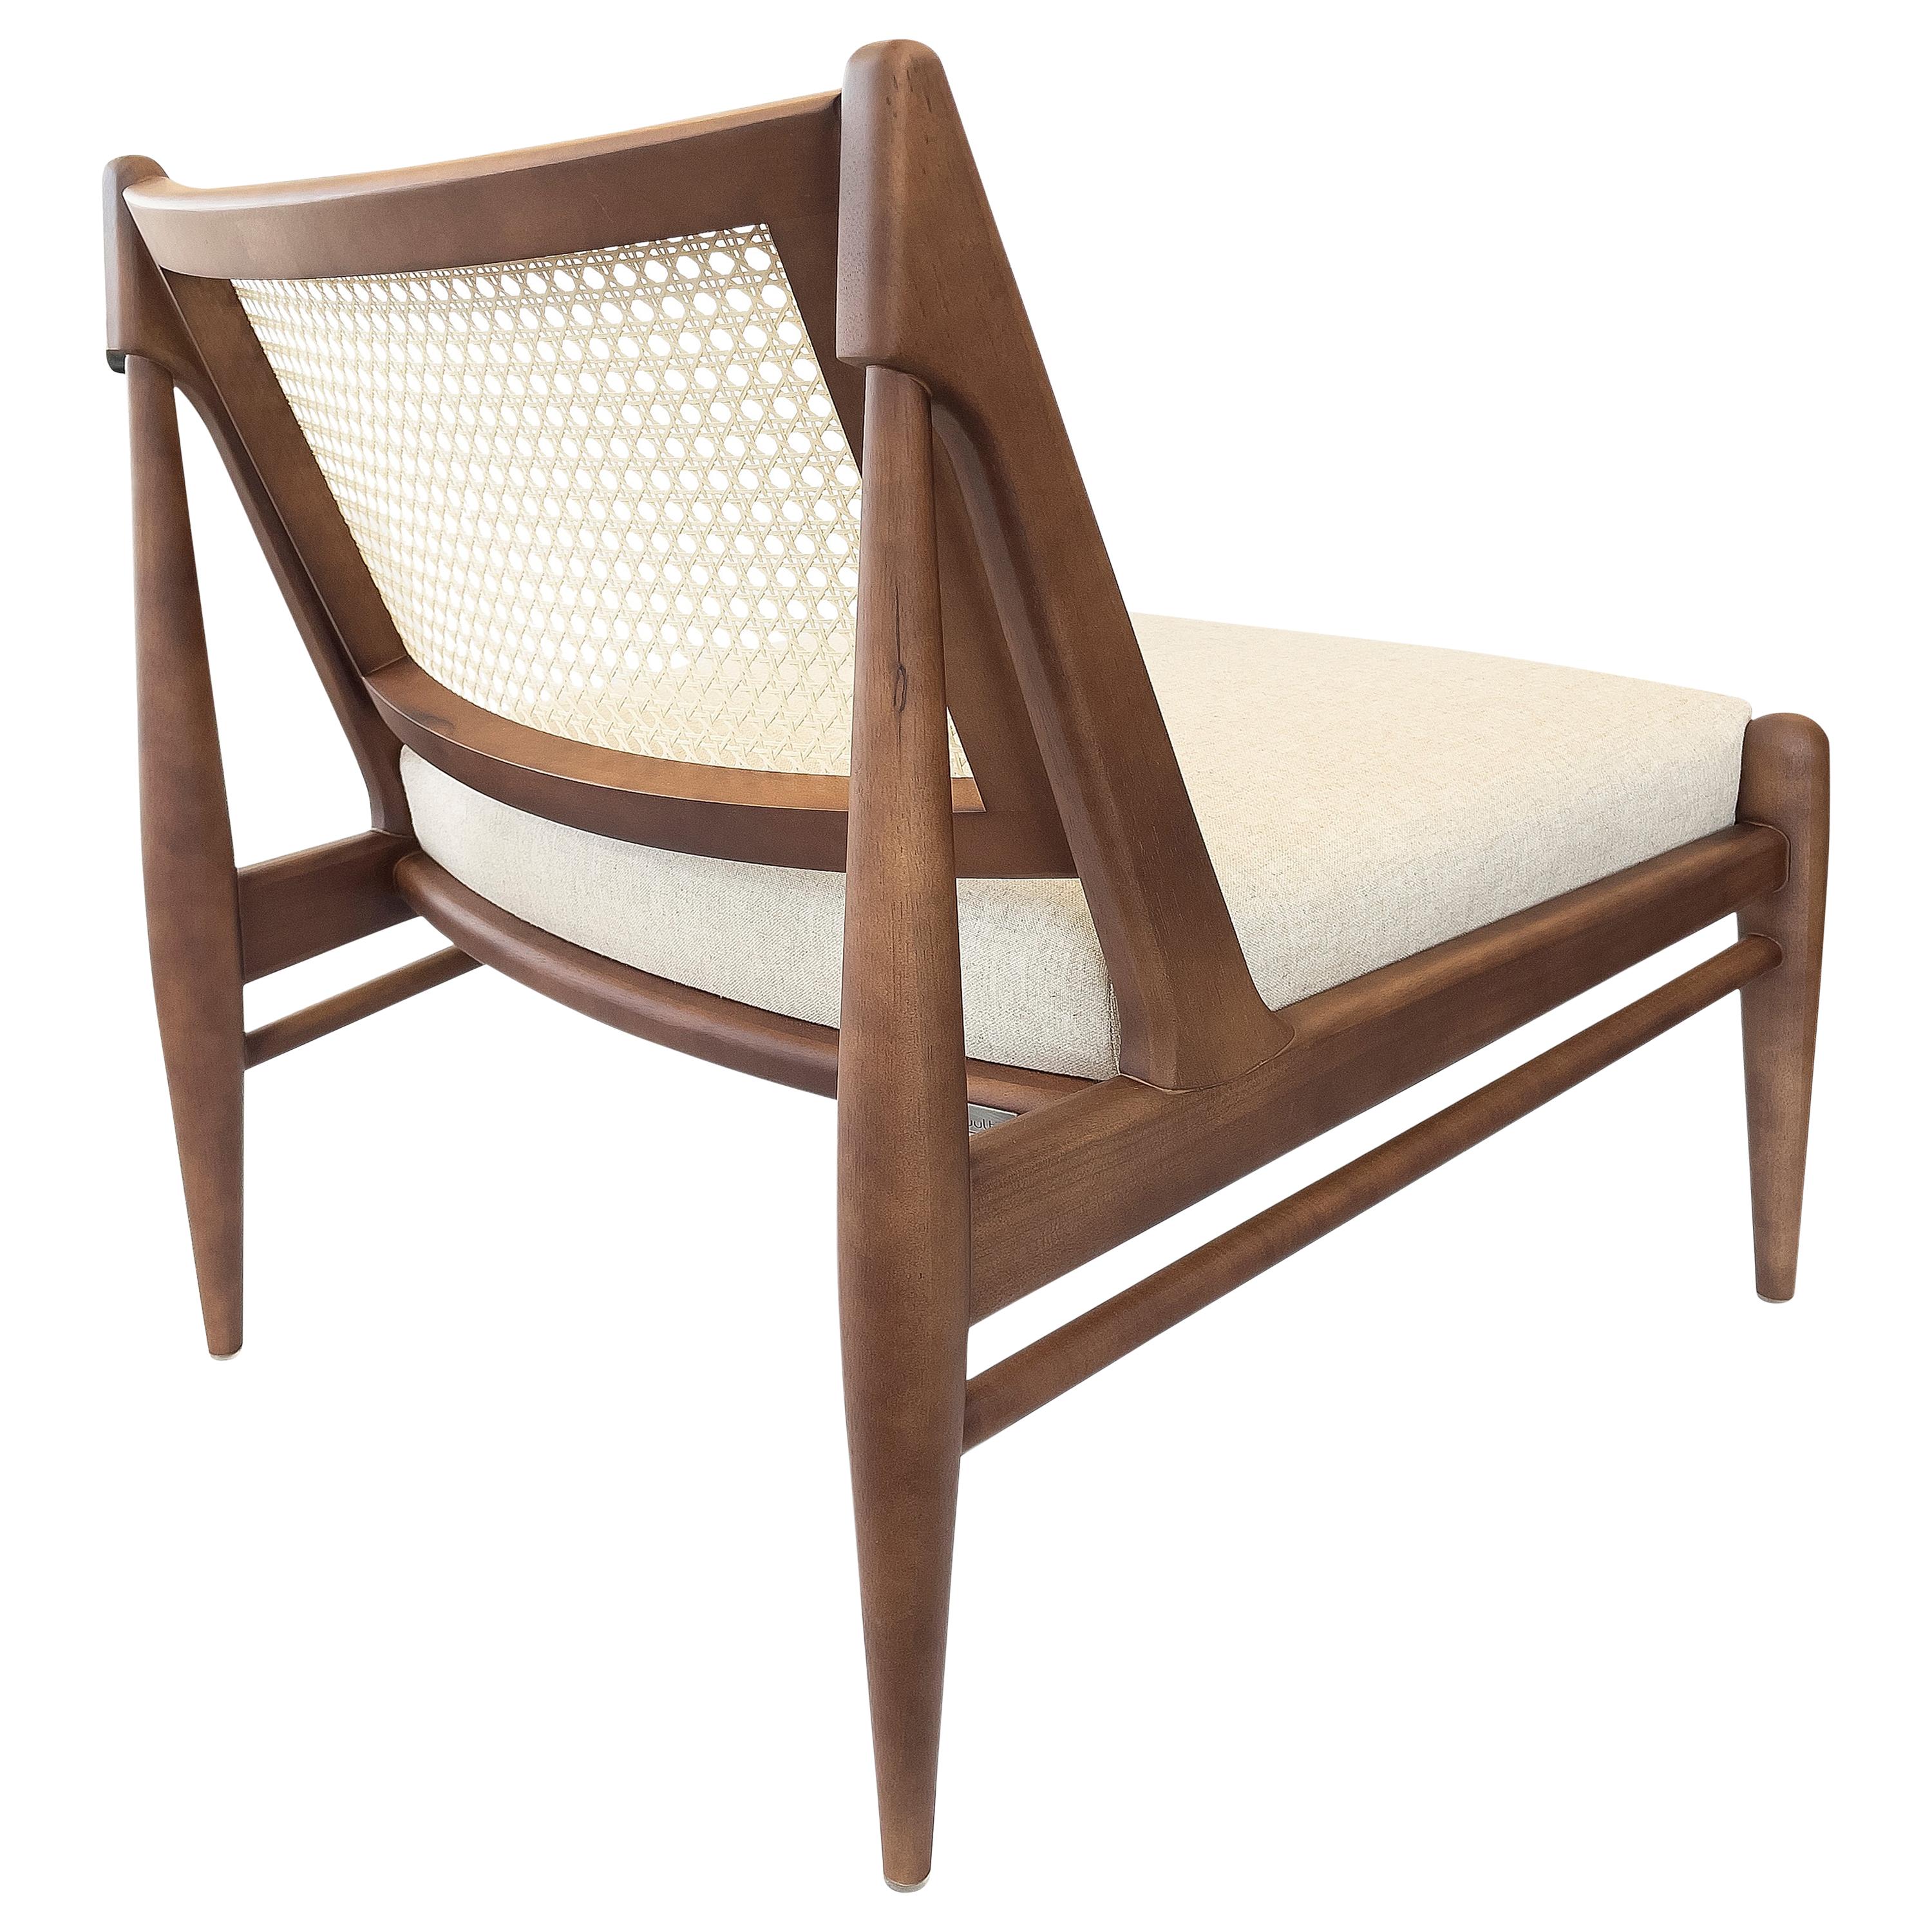 Donna Cane-Back Chair in Walnut Wood Finish with an Ivory Fabric Seat